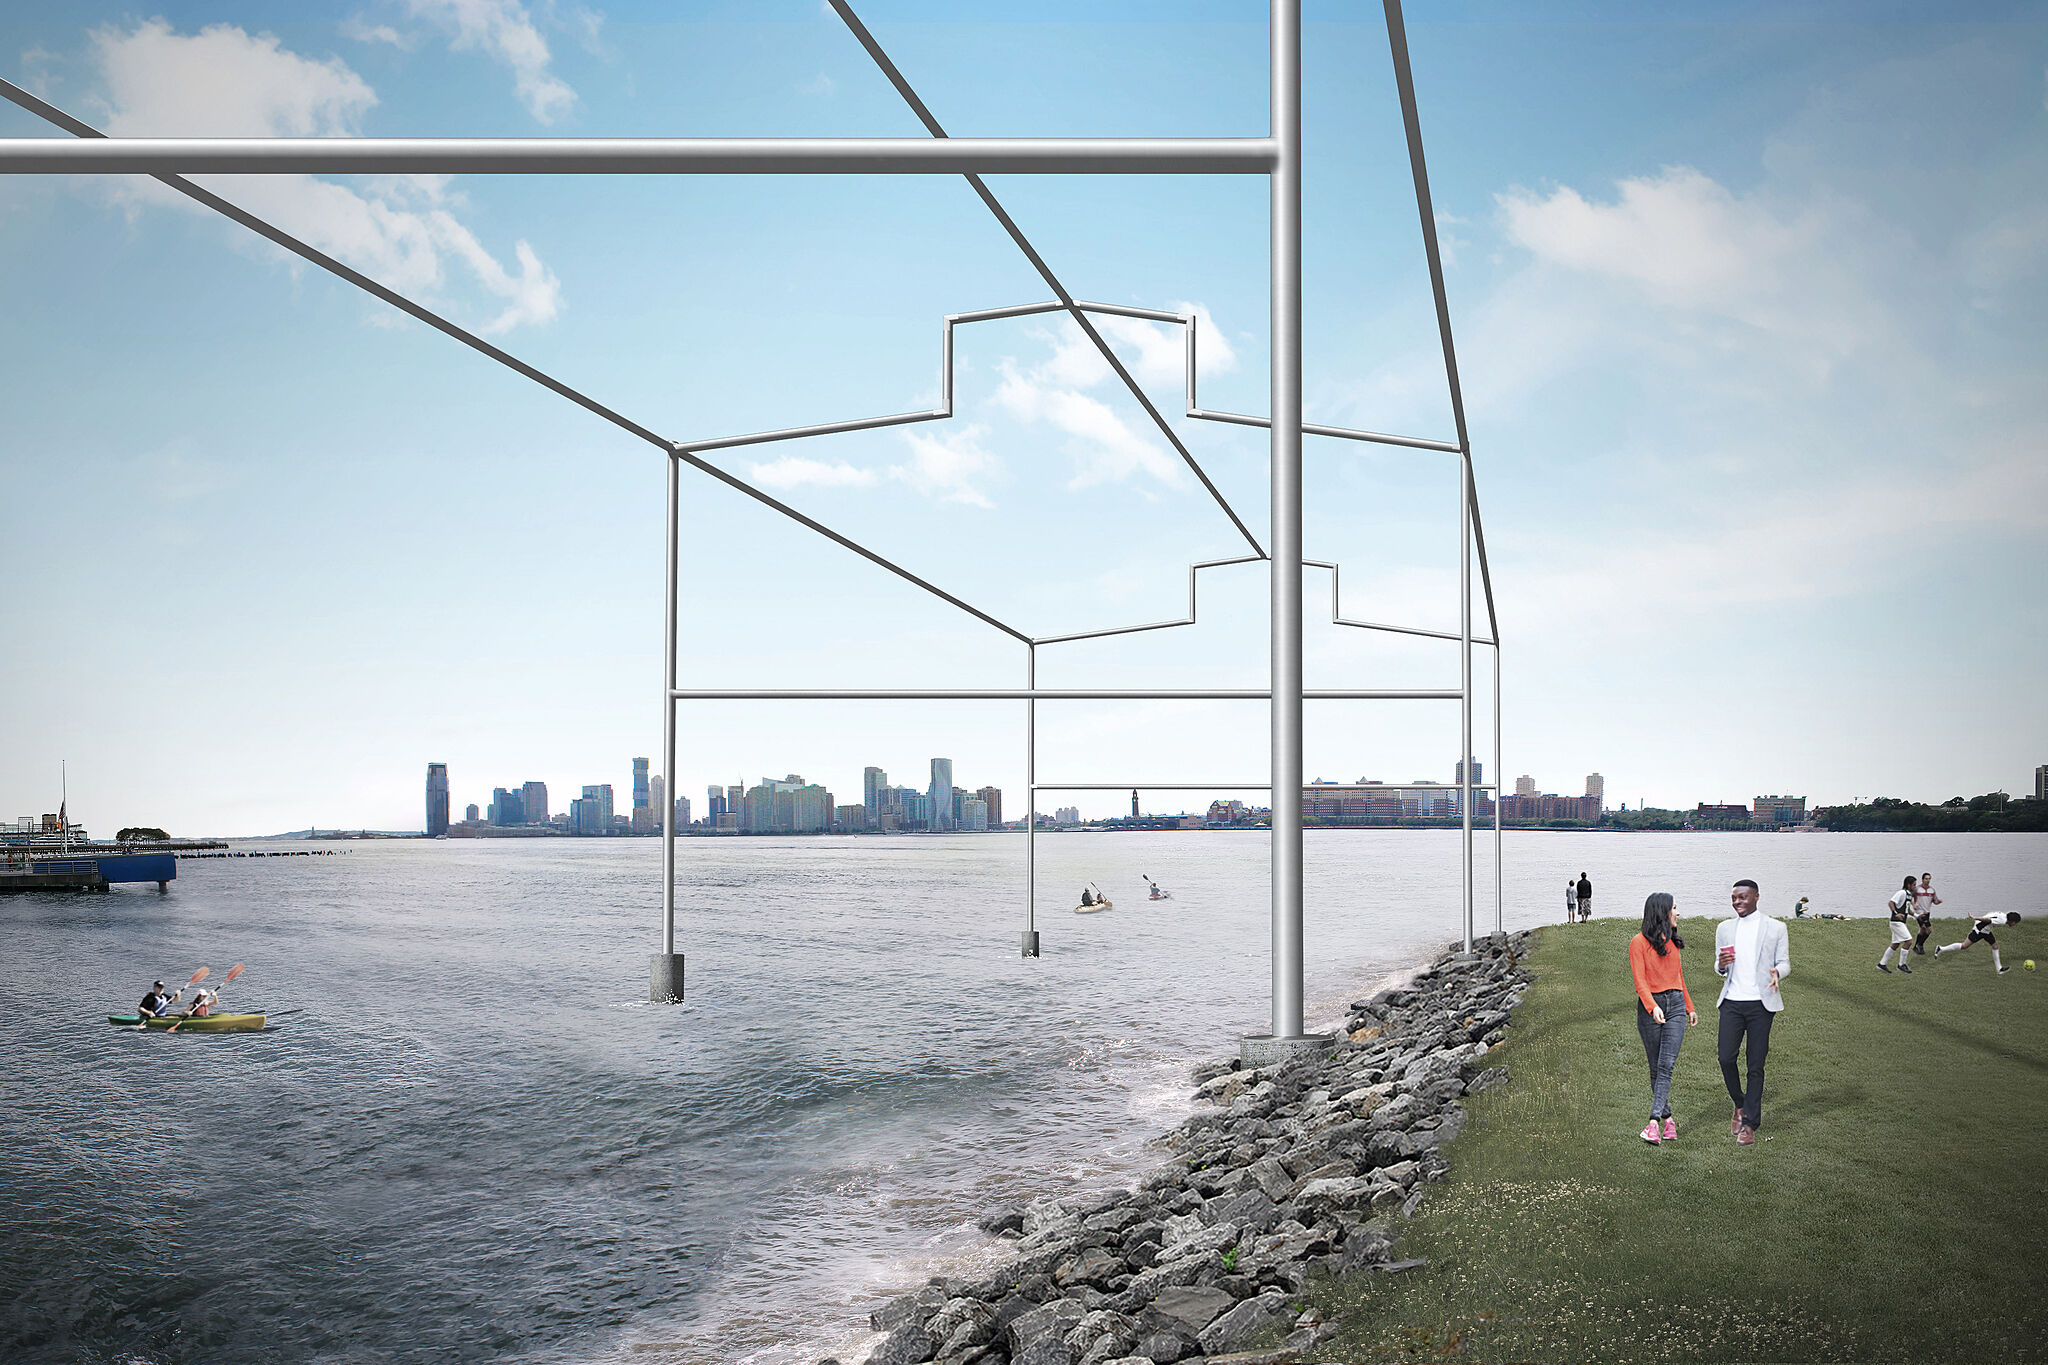 Rendering of a sculpture by David Hammons, resembling the frame of a shed rising from the Hudson River